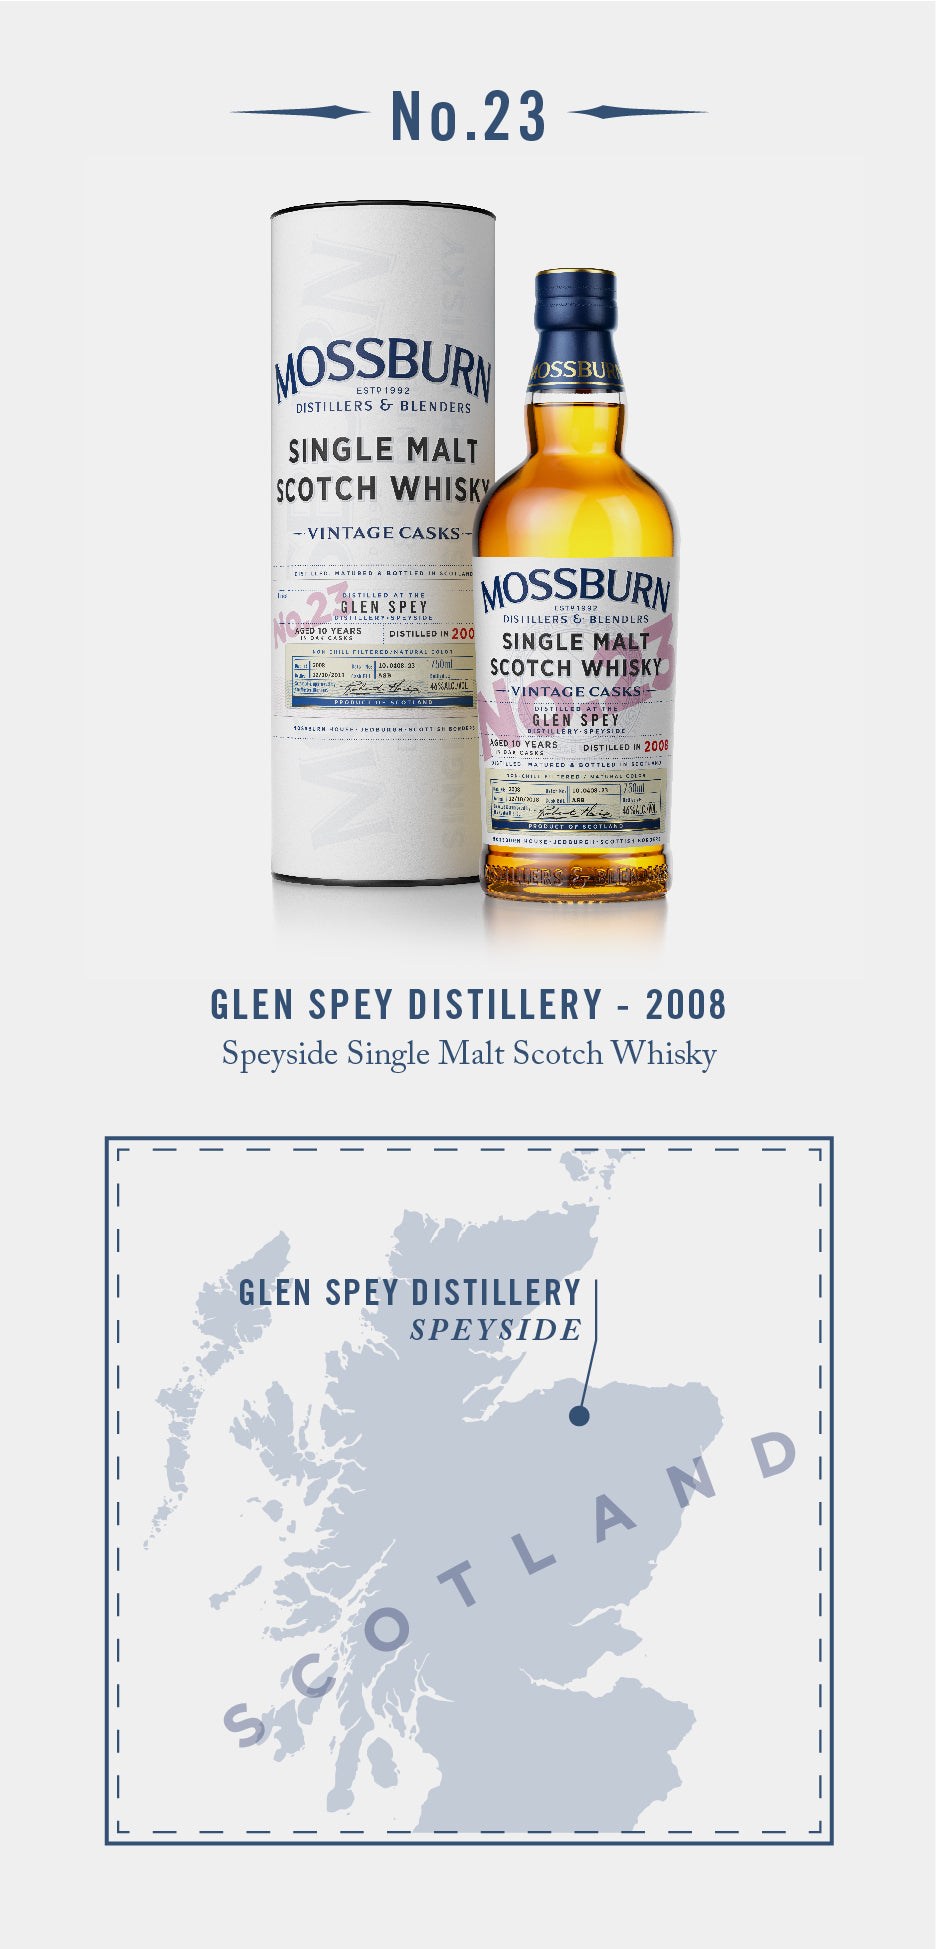 Glen Spey 10 Years Old No. 23 Scotch Whisky by Mossburn Distillers